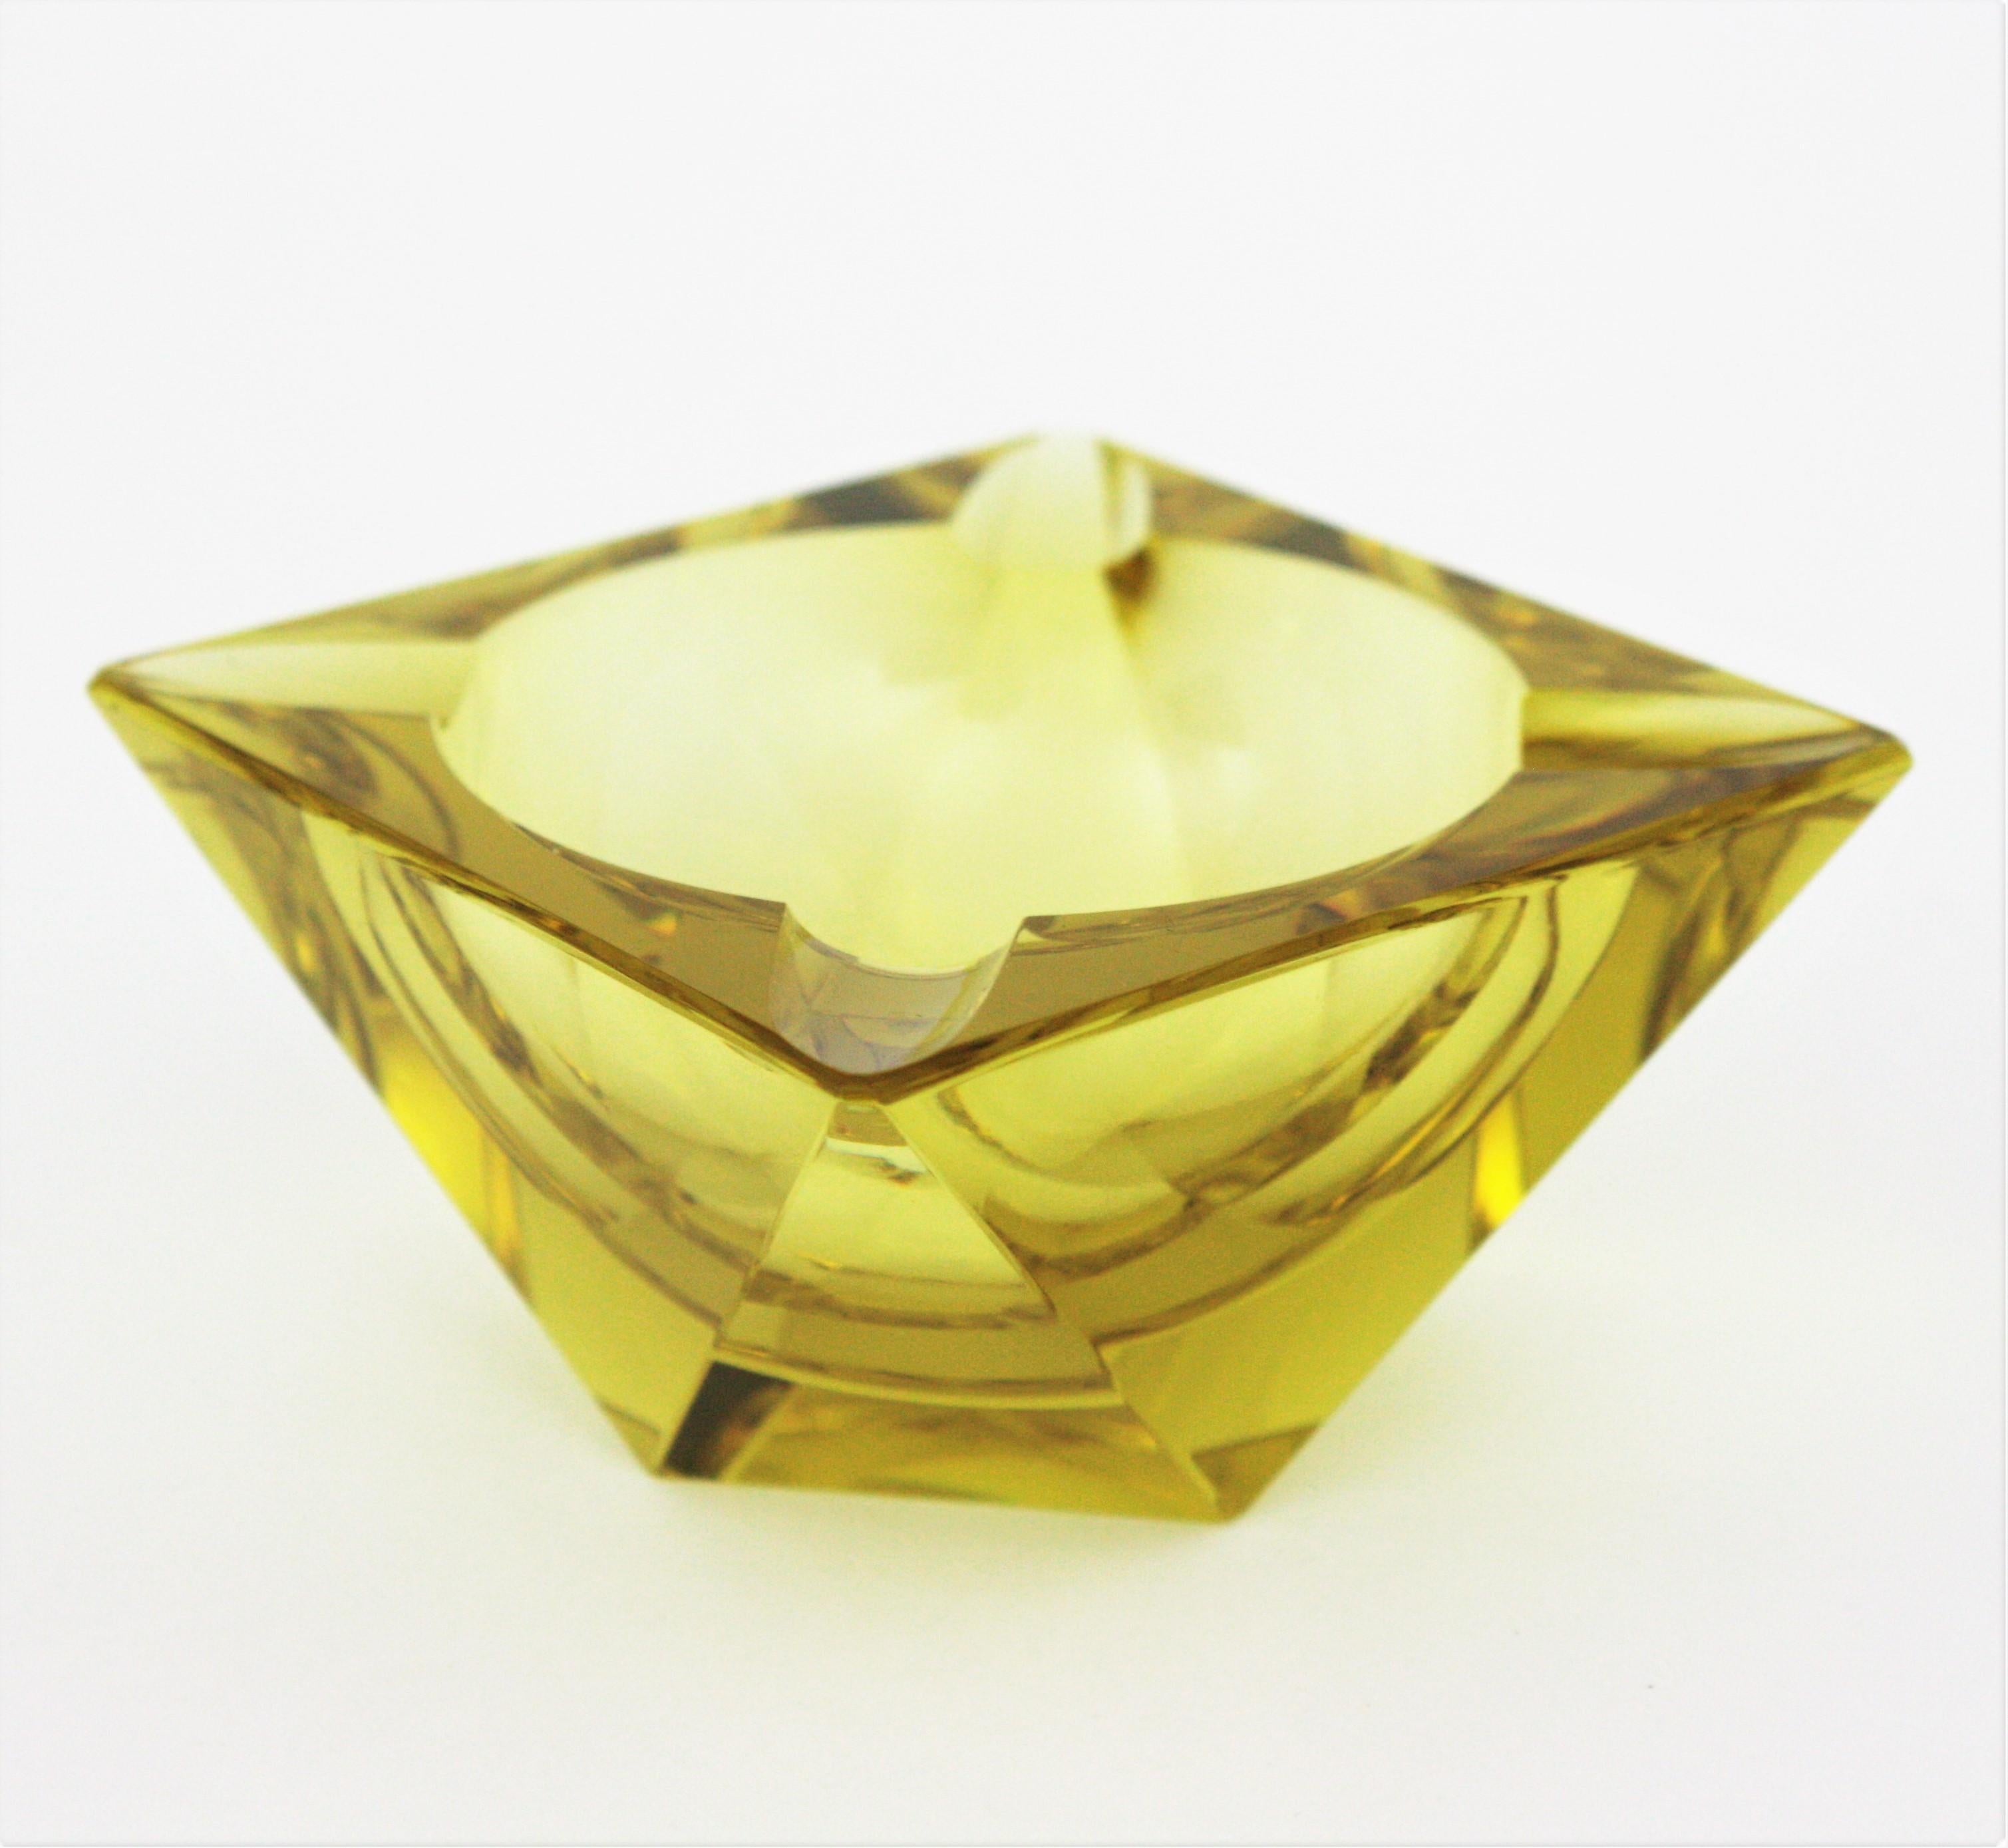 Beautiful faceted Murano glass ashtray in yellow color attributed to Flavio Poli, circa 1950s.
The color changes depending on the light. Neon yellow under white ligth and more orange under warm light.
Use it as ashtray or rings bowl.
Measures: 9